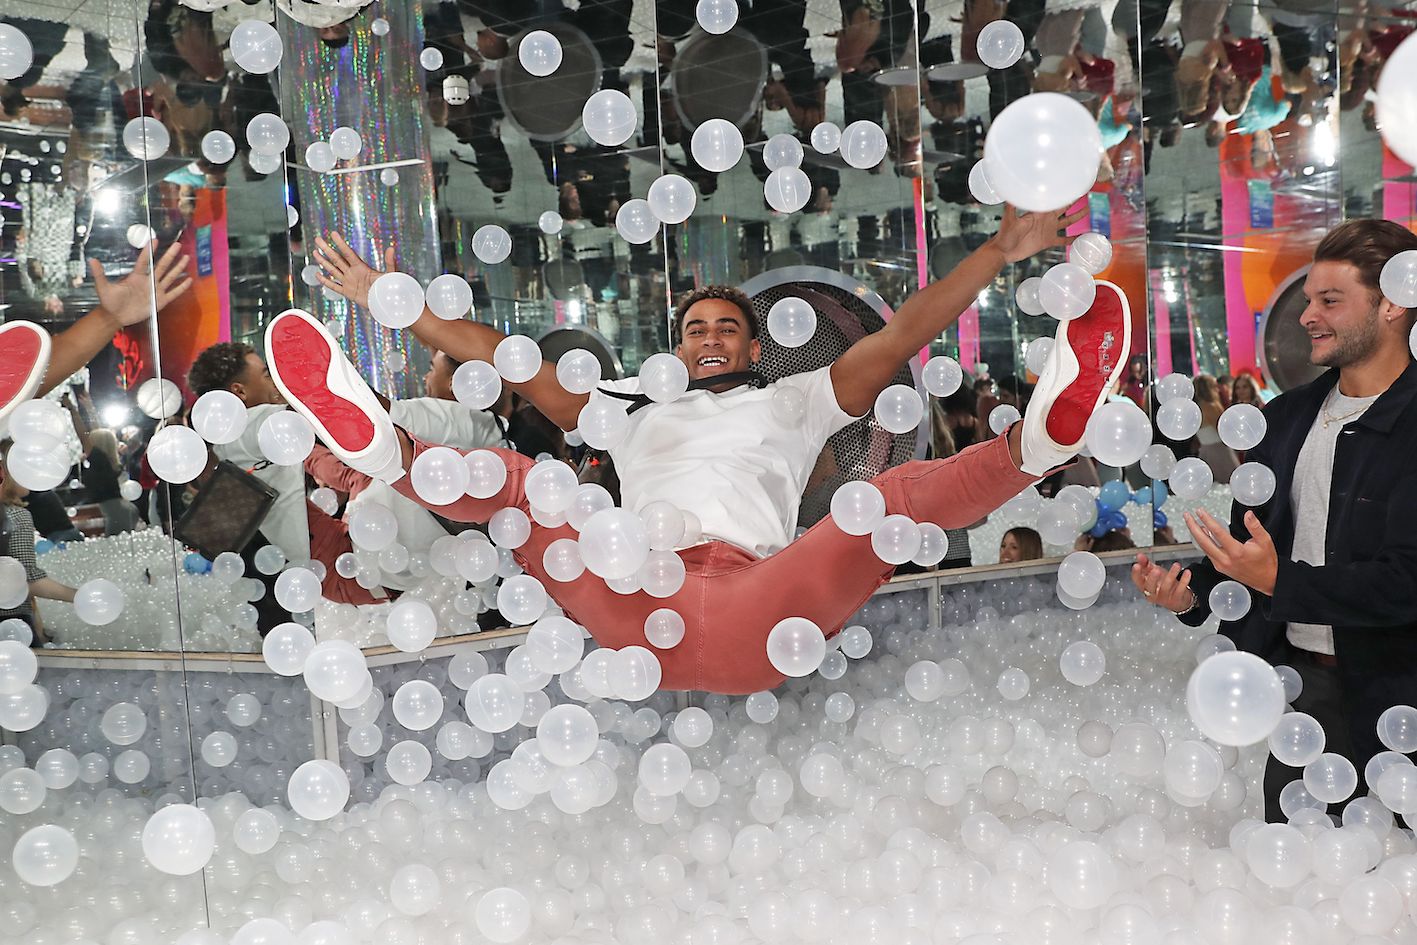 man jumping into ball pit